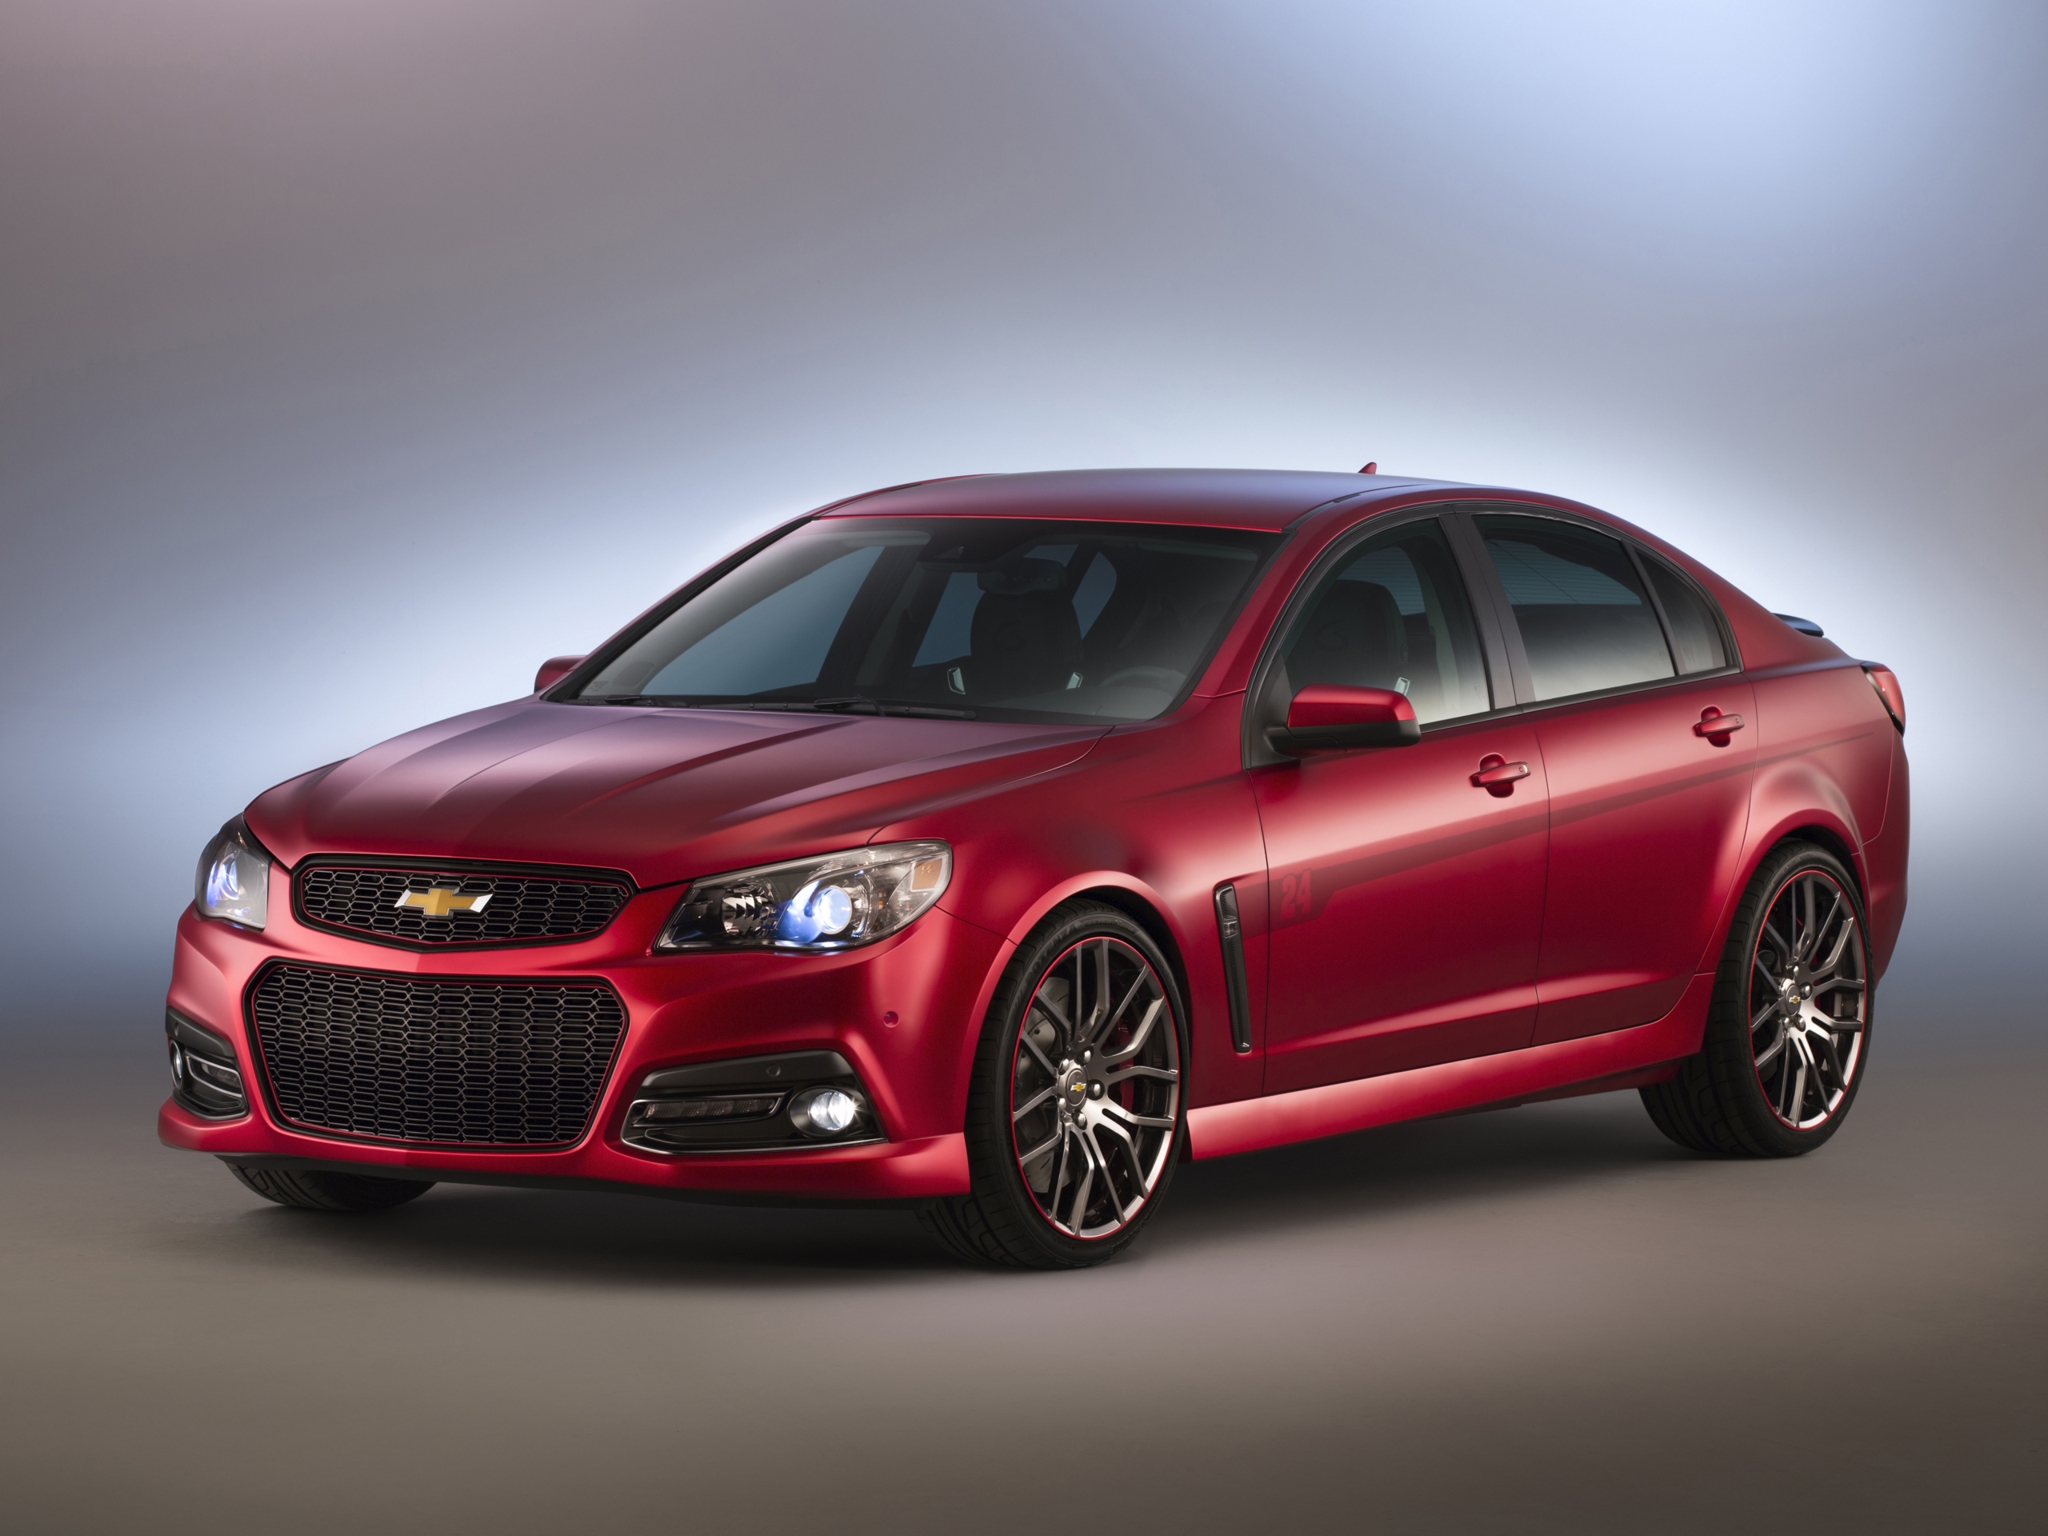 2013, Chevrolet, Ss, By, Jeff, Gordon, Tuning, Muscle, S s Wallpaper